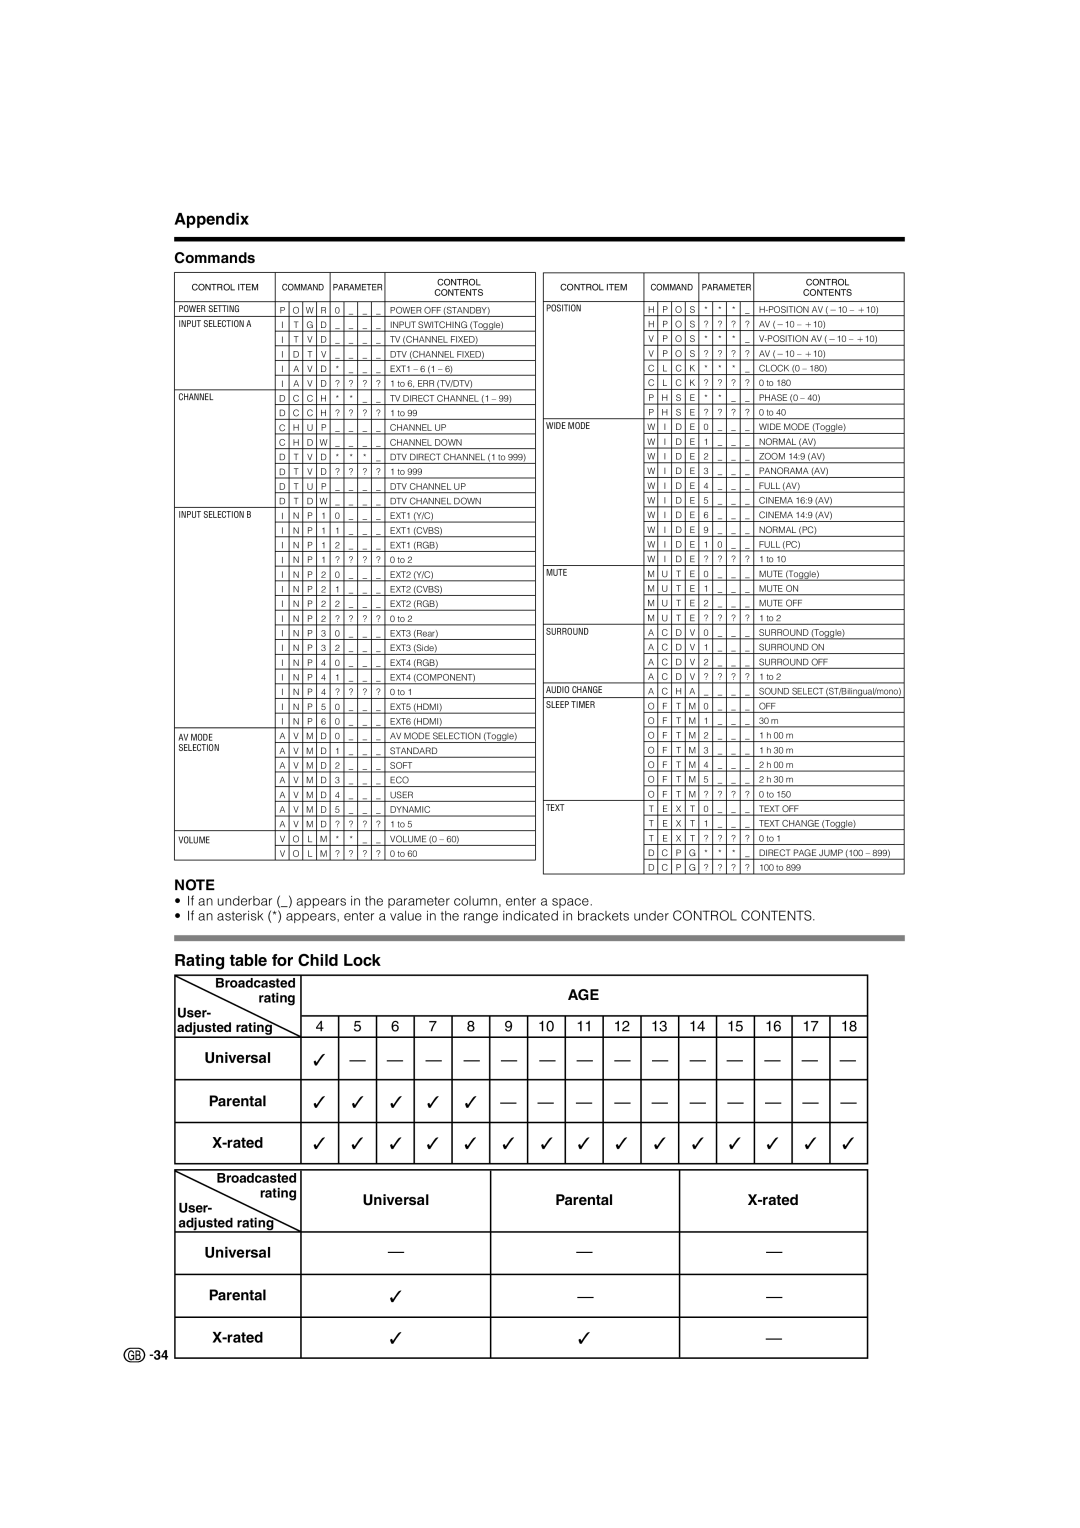 Sharp LC-37AD5S, LC-42AD5S operation manual Rating table for Child Lock, Commands, Universal, Parental, X-rated, Appendix 